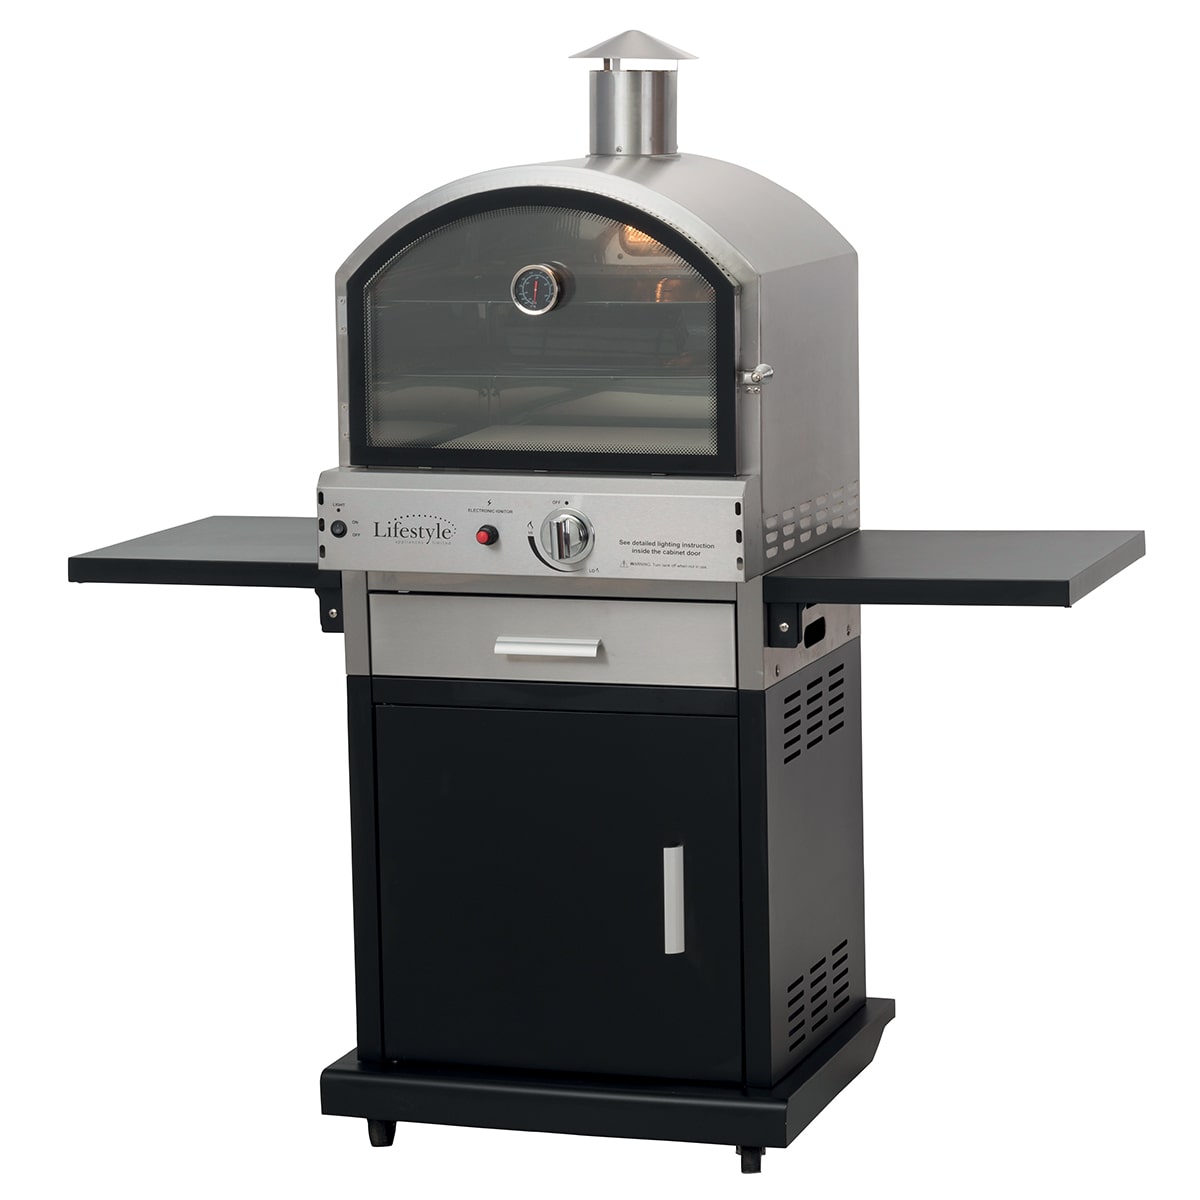 Lifestyle Verona Gas Pizza Oven LFS691 JD Catering Equipment Solutions Ltd